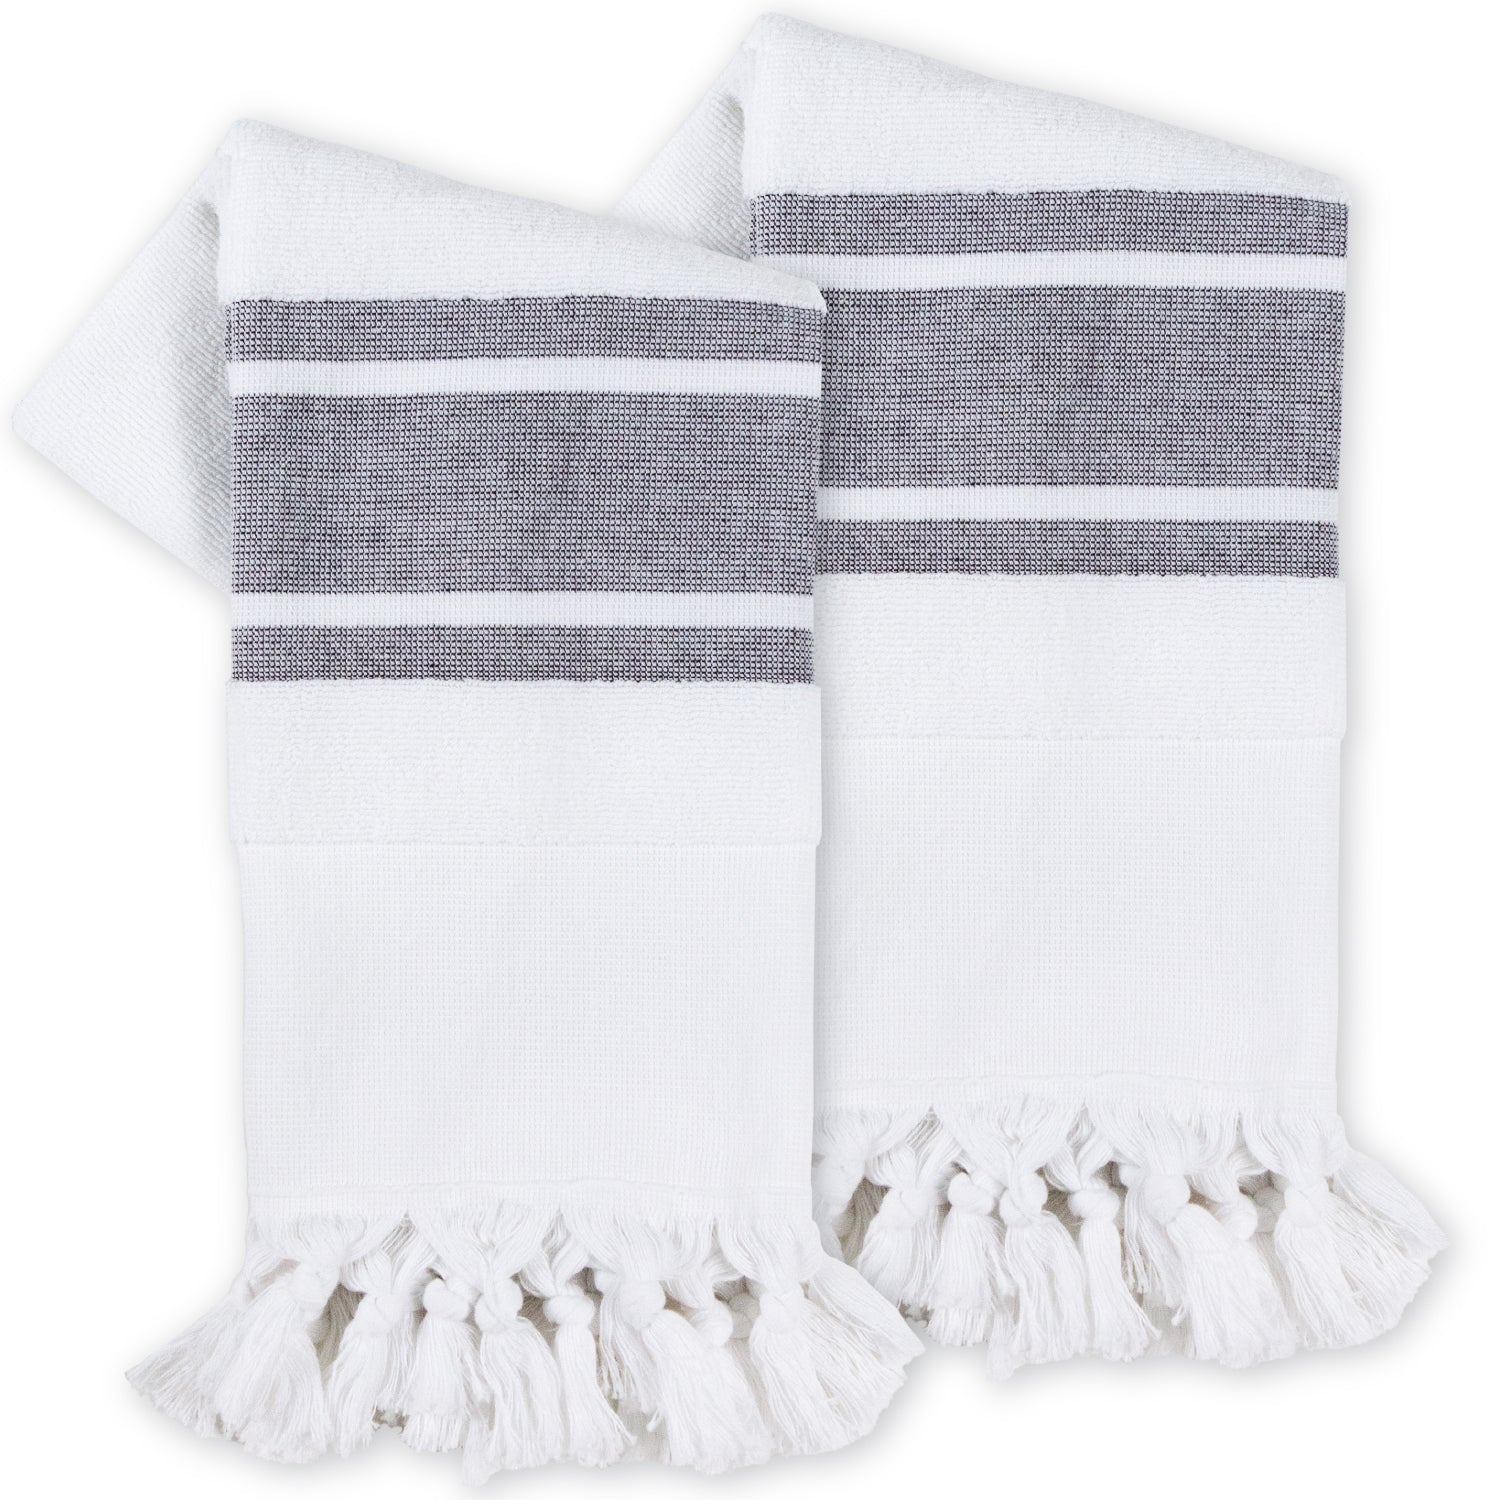 Farmhouse Boho Hand Towels for Bathroom & Kitchen with Tassels